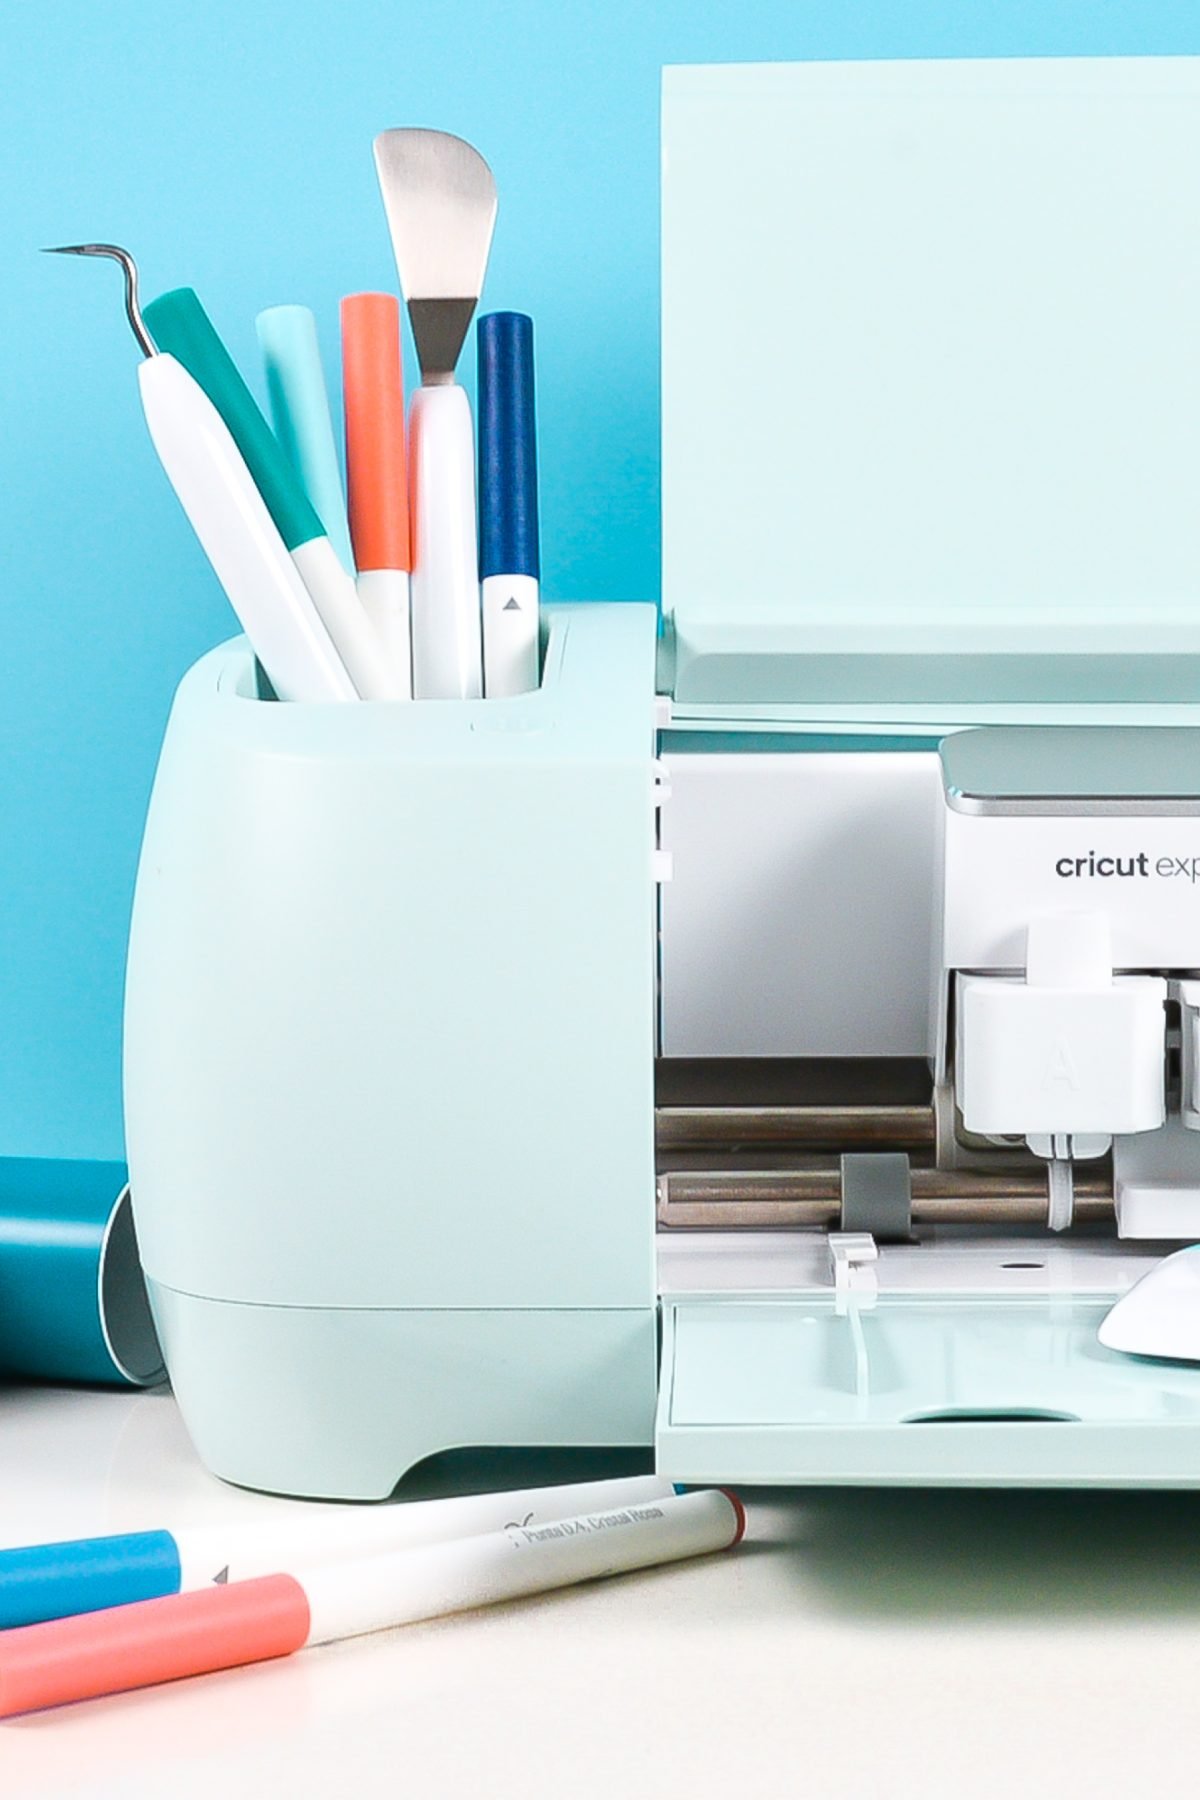 How to Reset Cricut Explore Air 2: The Ultimate Guide.